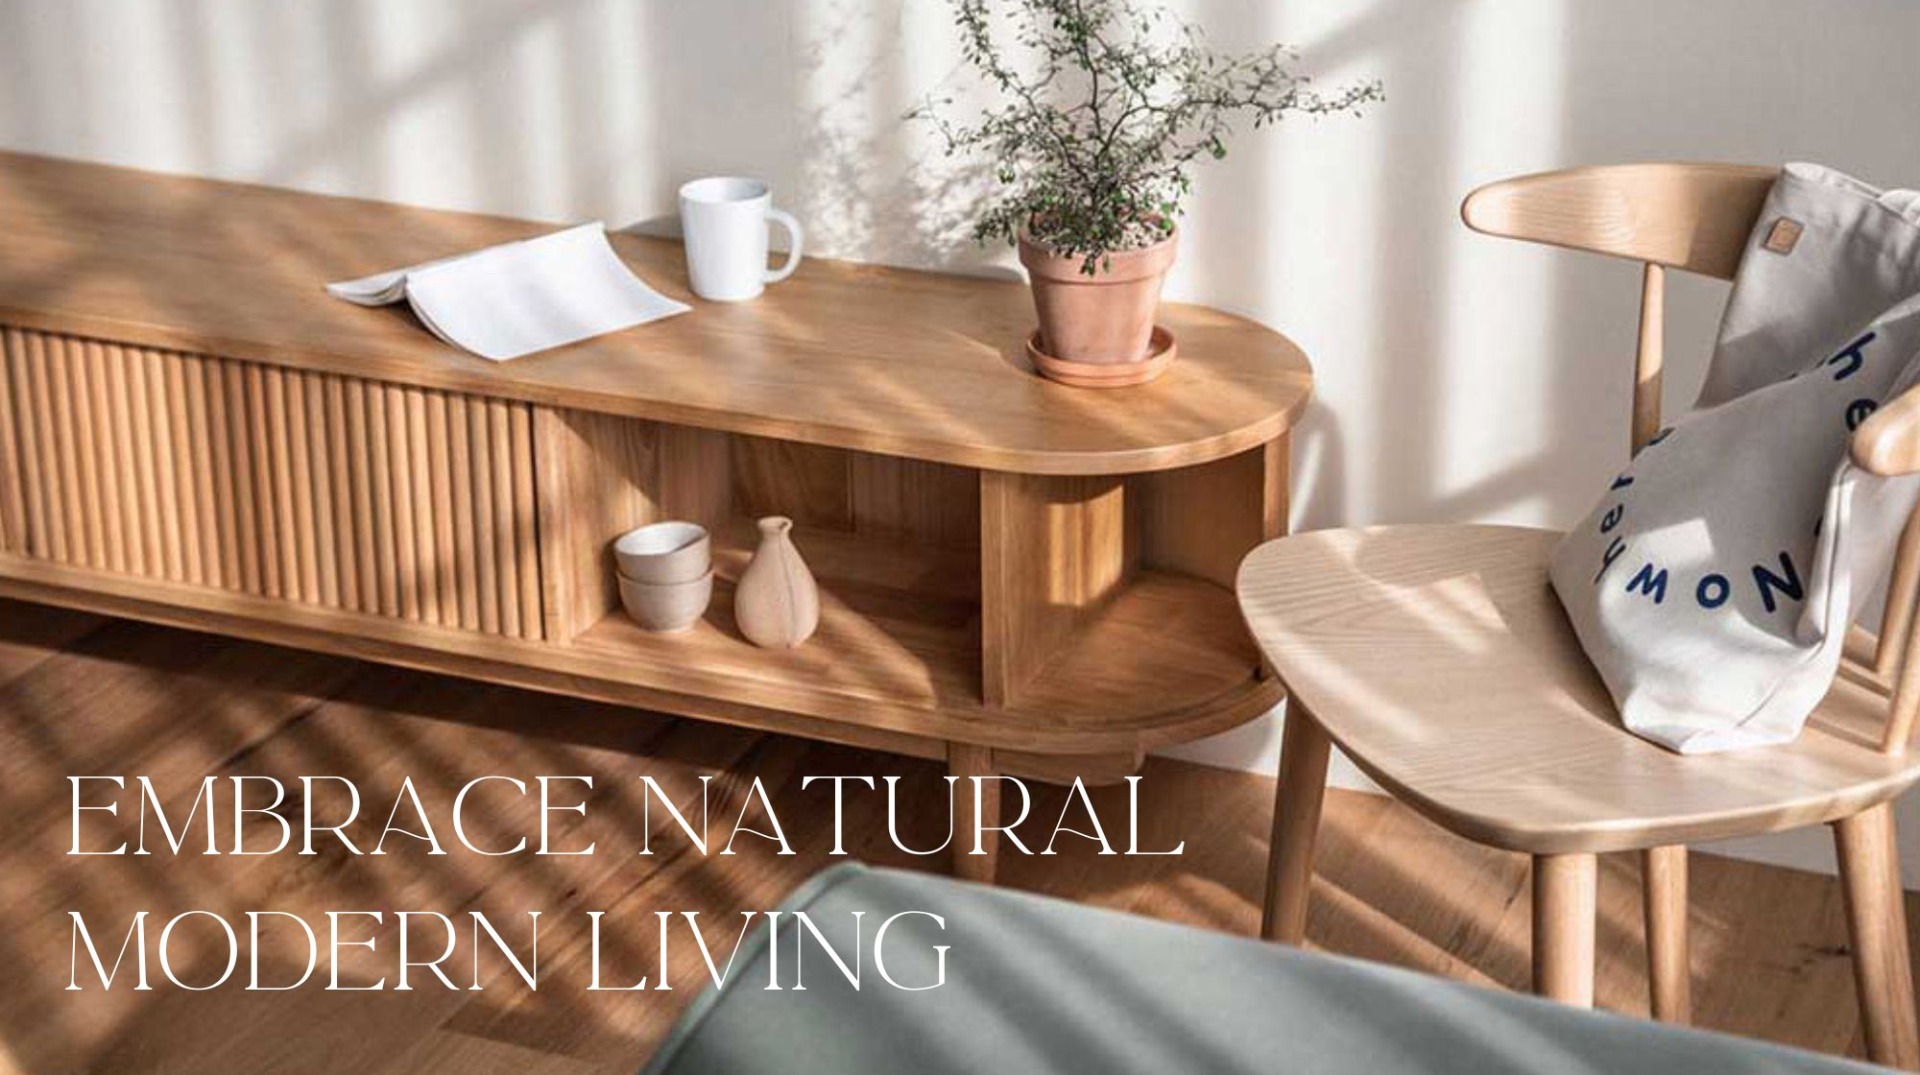 Embrace A Natural Way of Modern Living